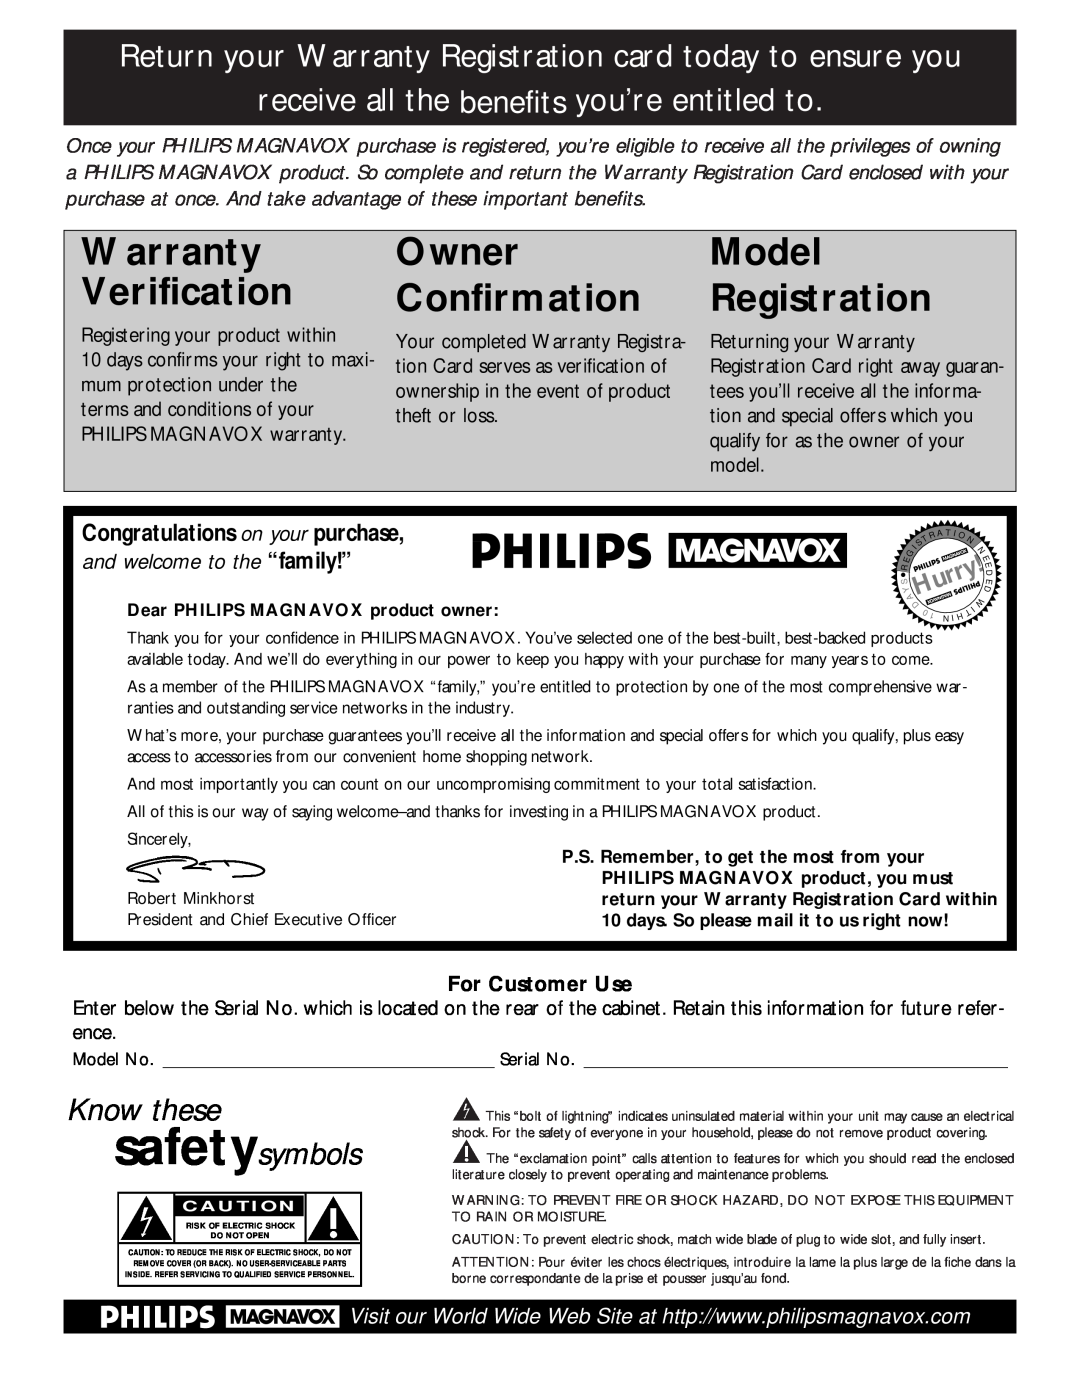 Philips MAT960 For Customer Use, Warranty Verification, Owner Confirmation, Model Registration, Know these safetysymbols 